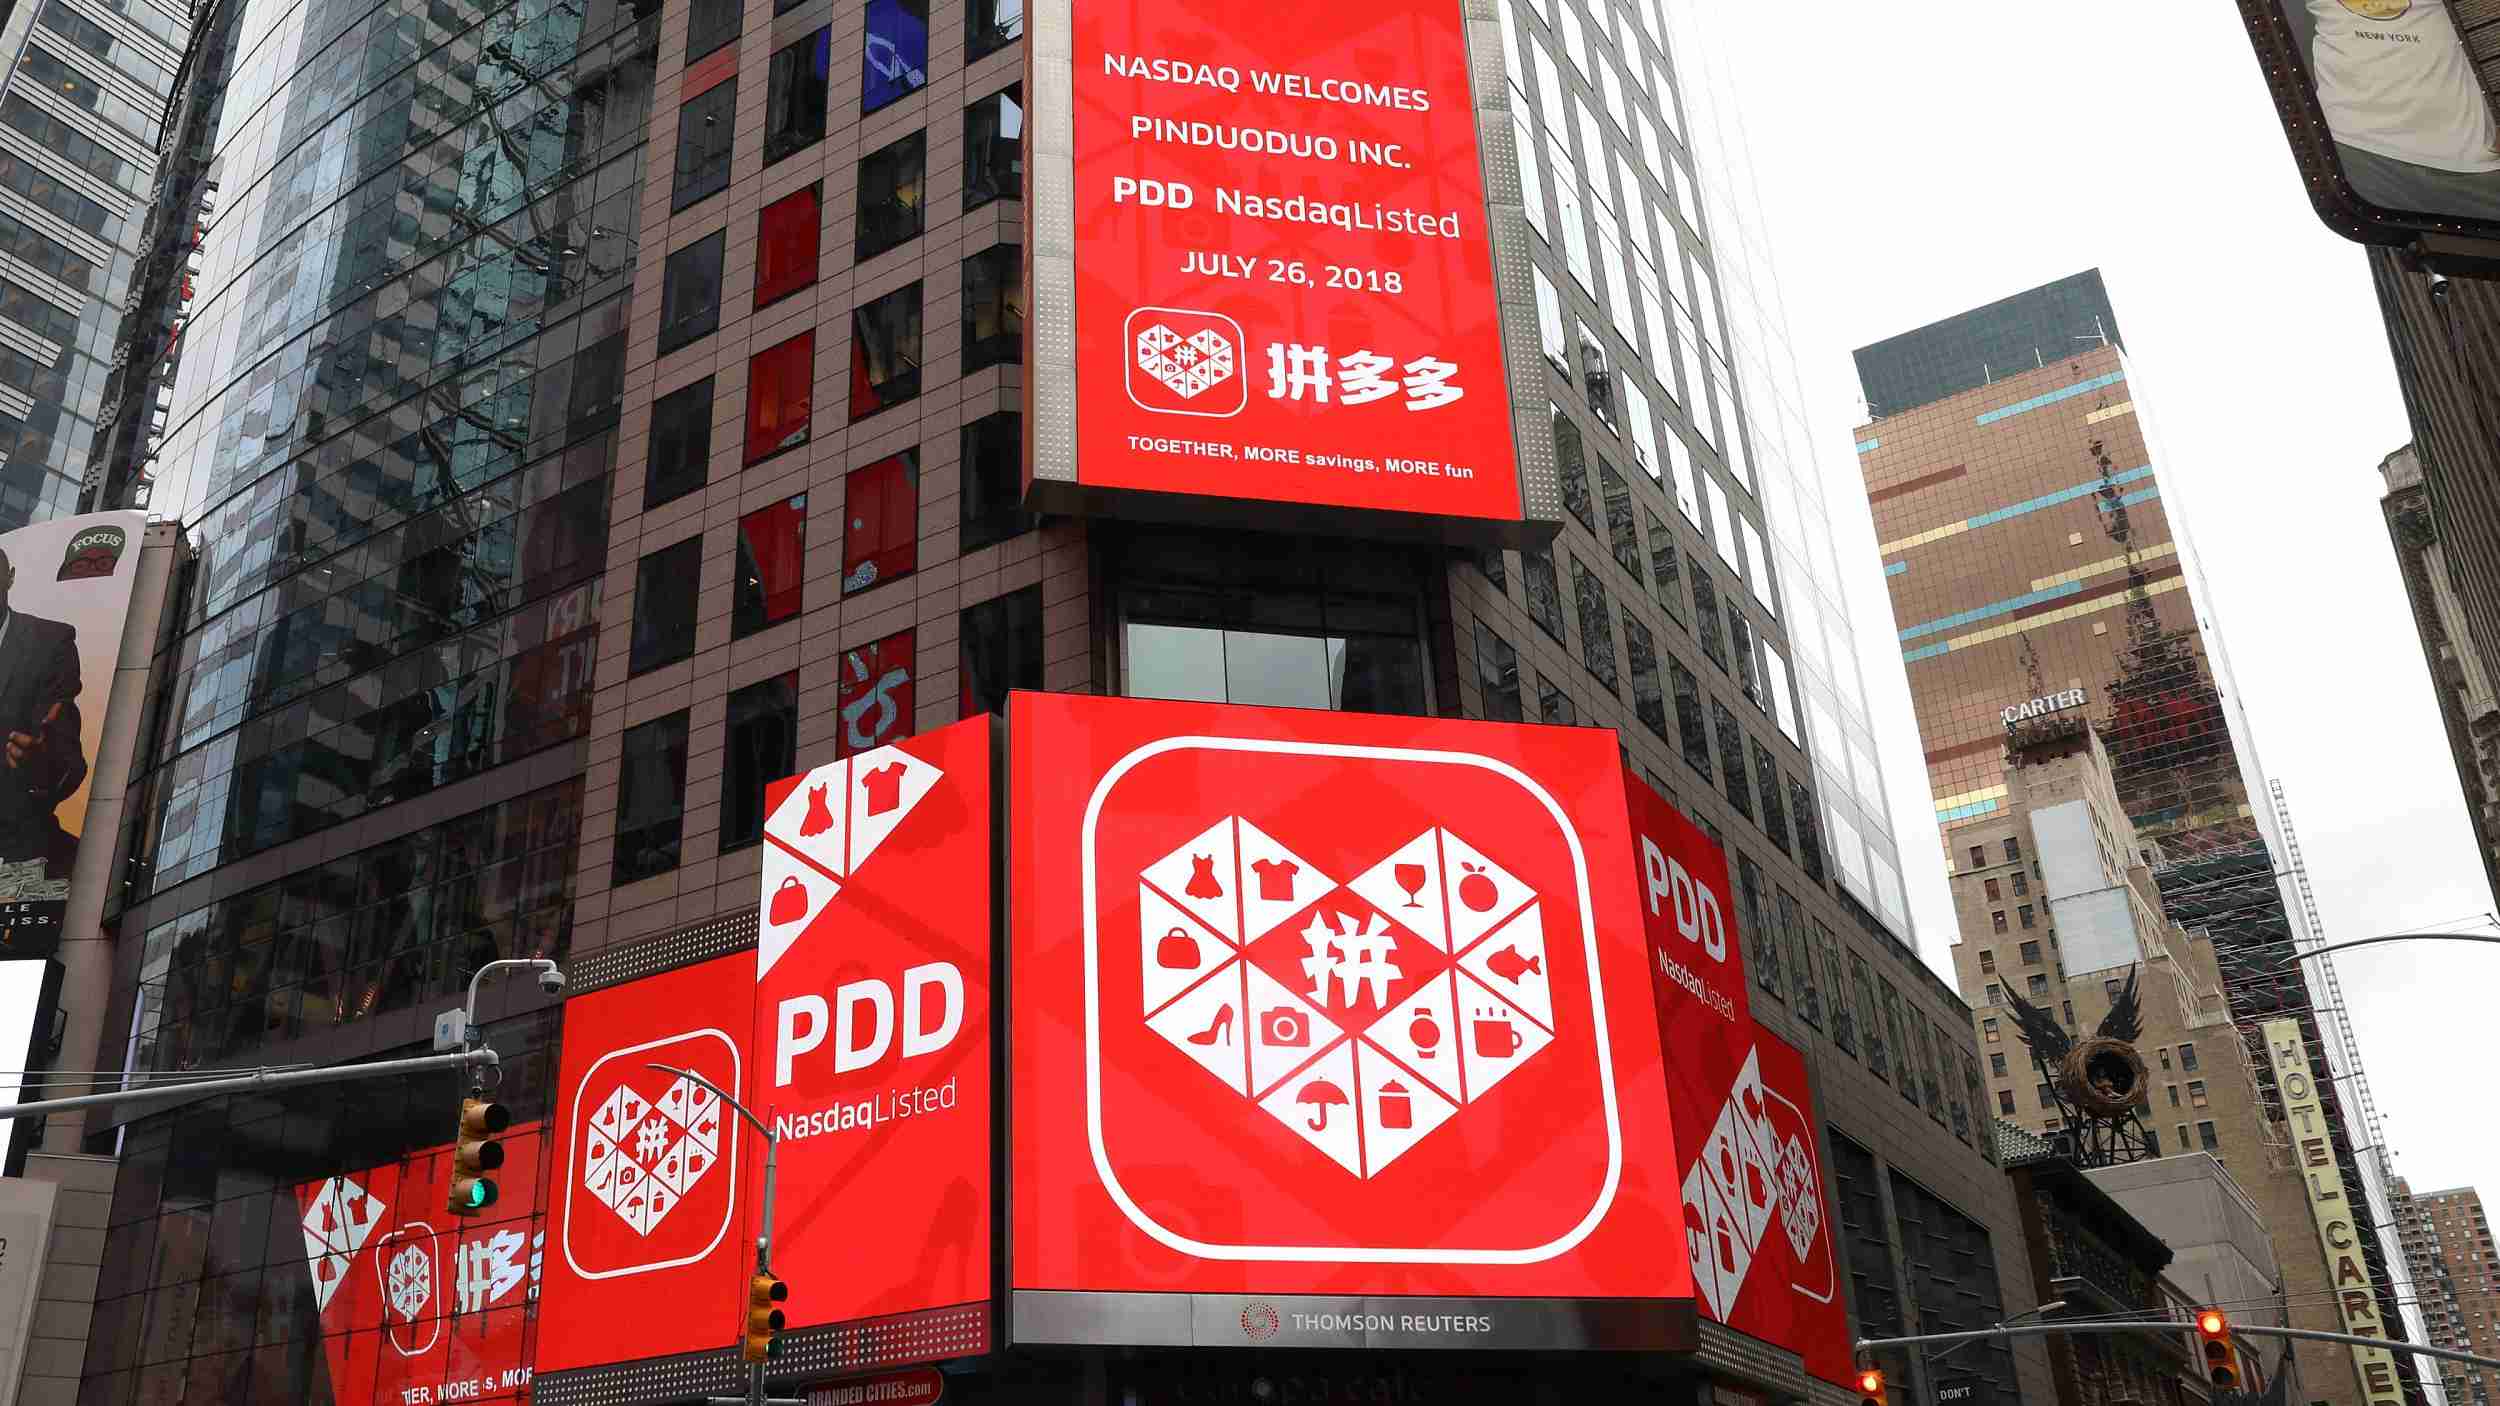 China’s e-commerce giant Pinduoduo launches US shopping site to take on Amazon